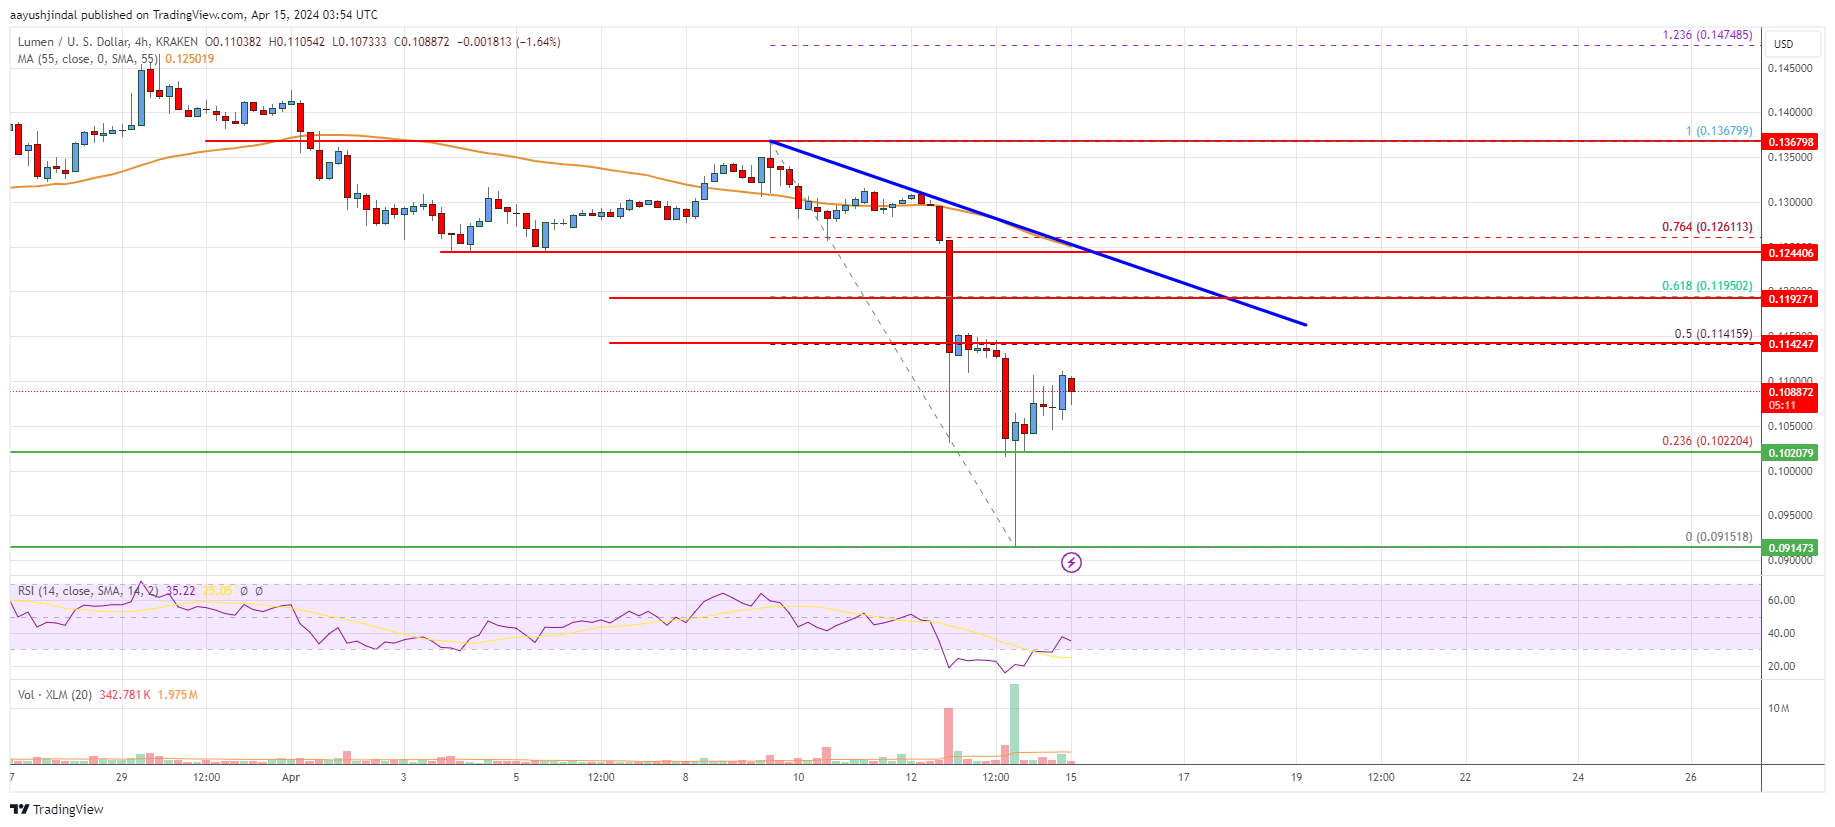 Stellar Lumen (XLM) Price Recovery Faces Many Hurdles At $0.1150